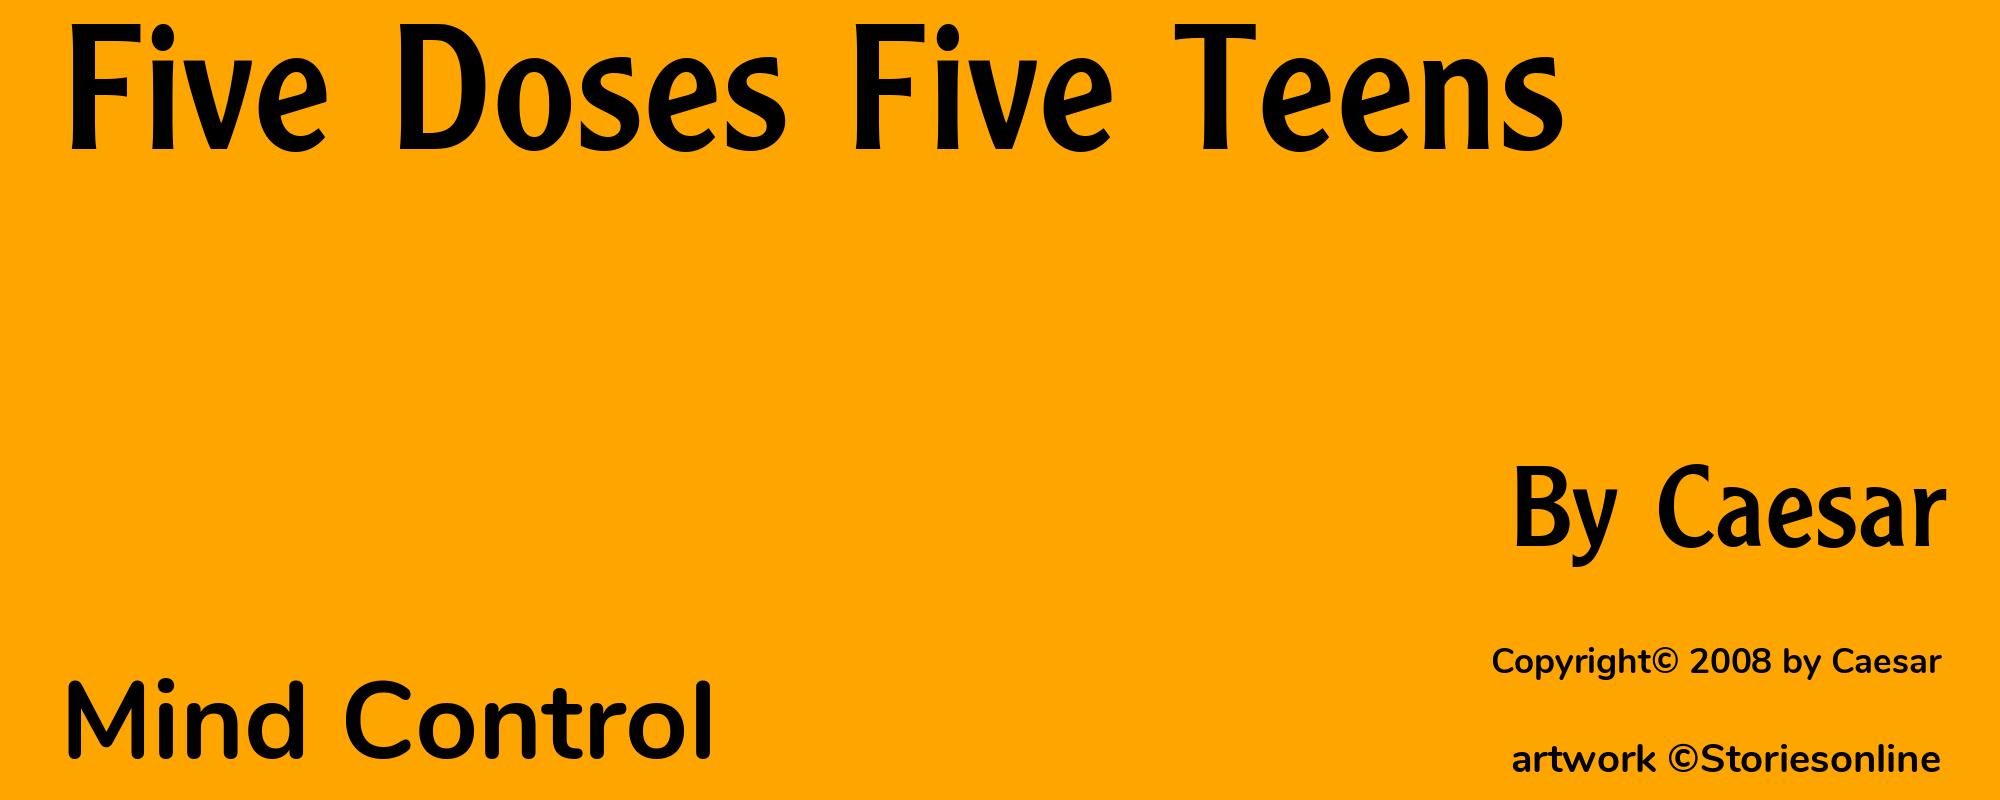 Five Doses Five Teens - Cover